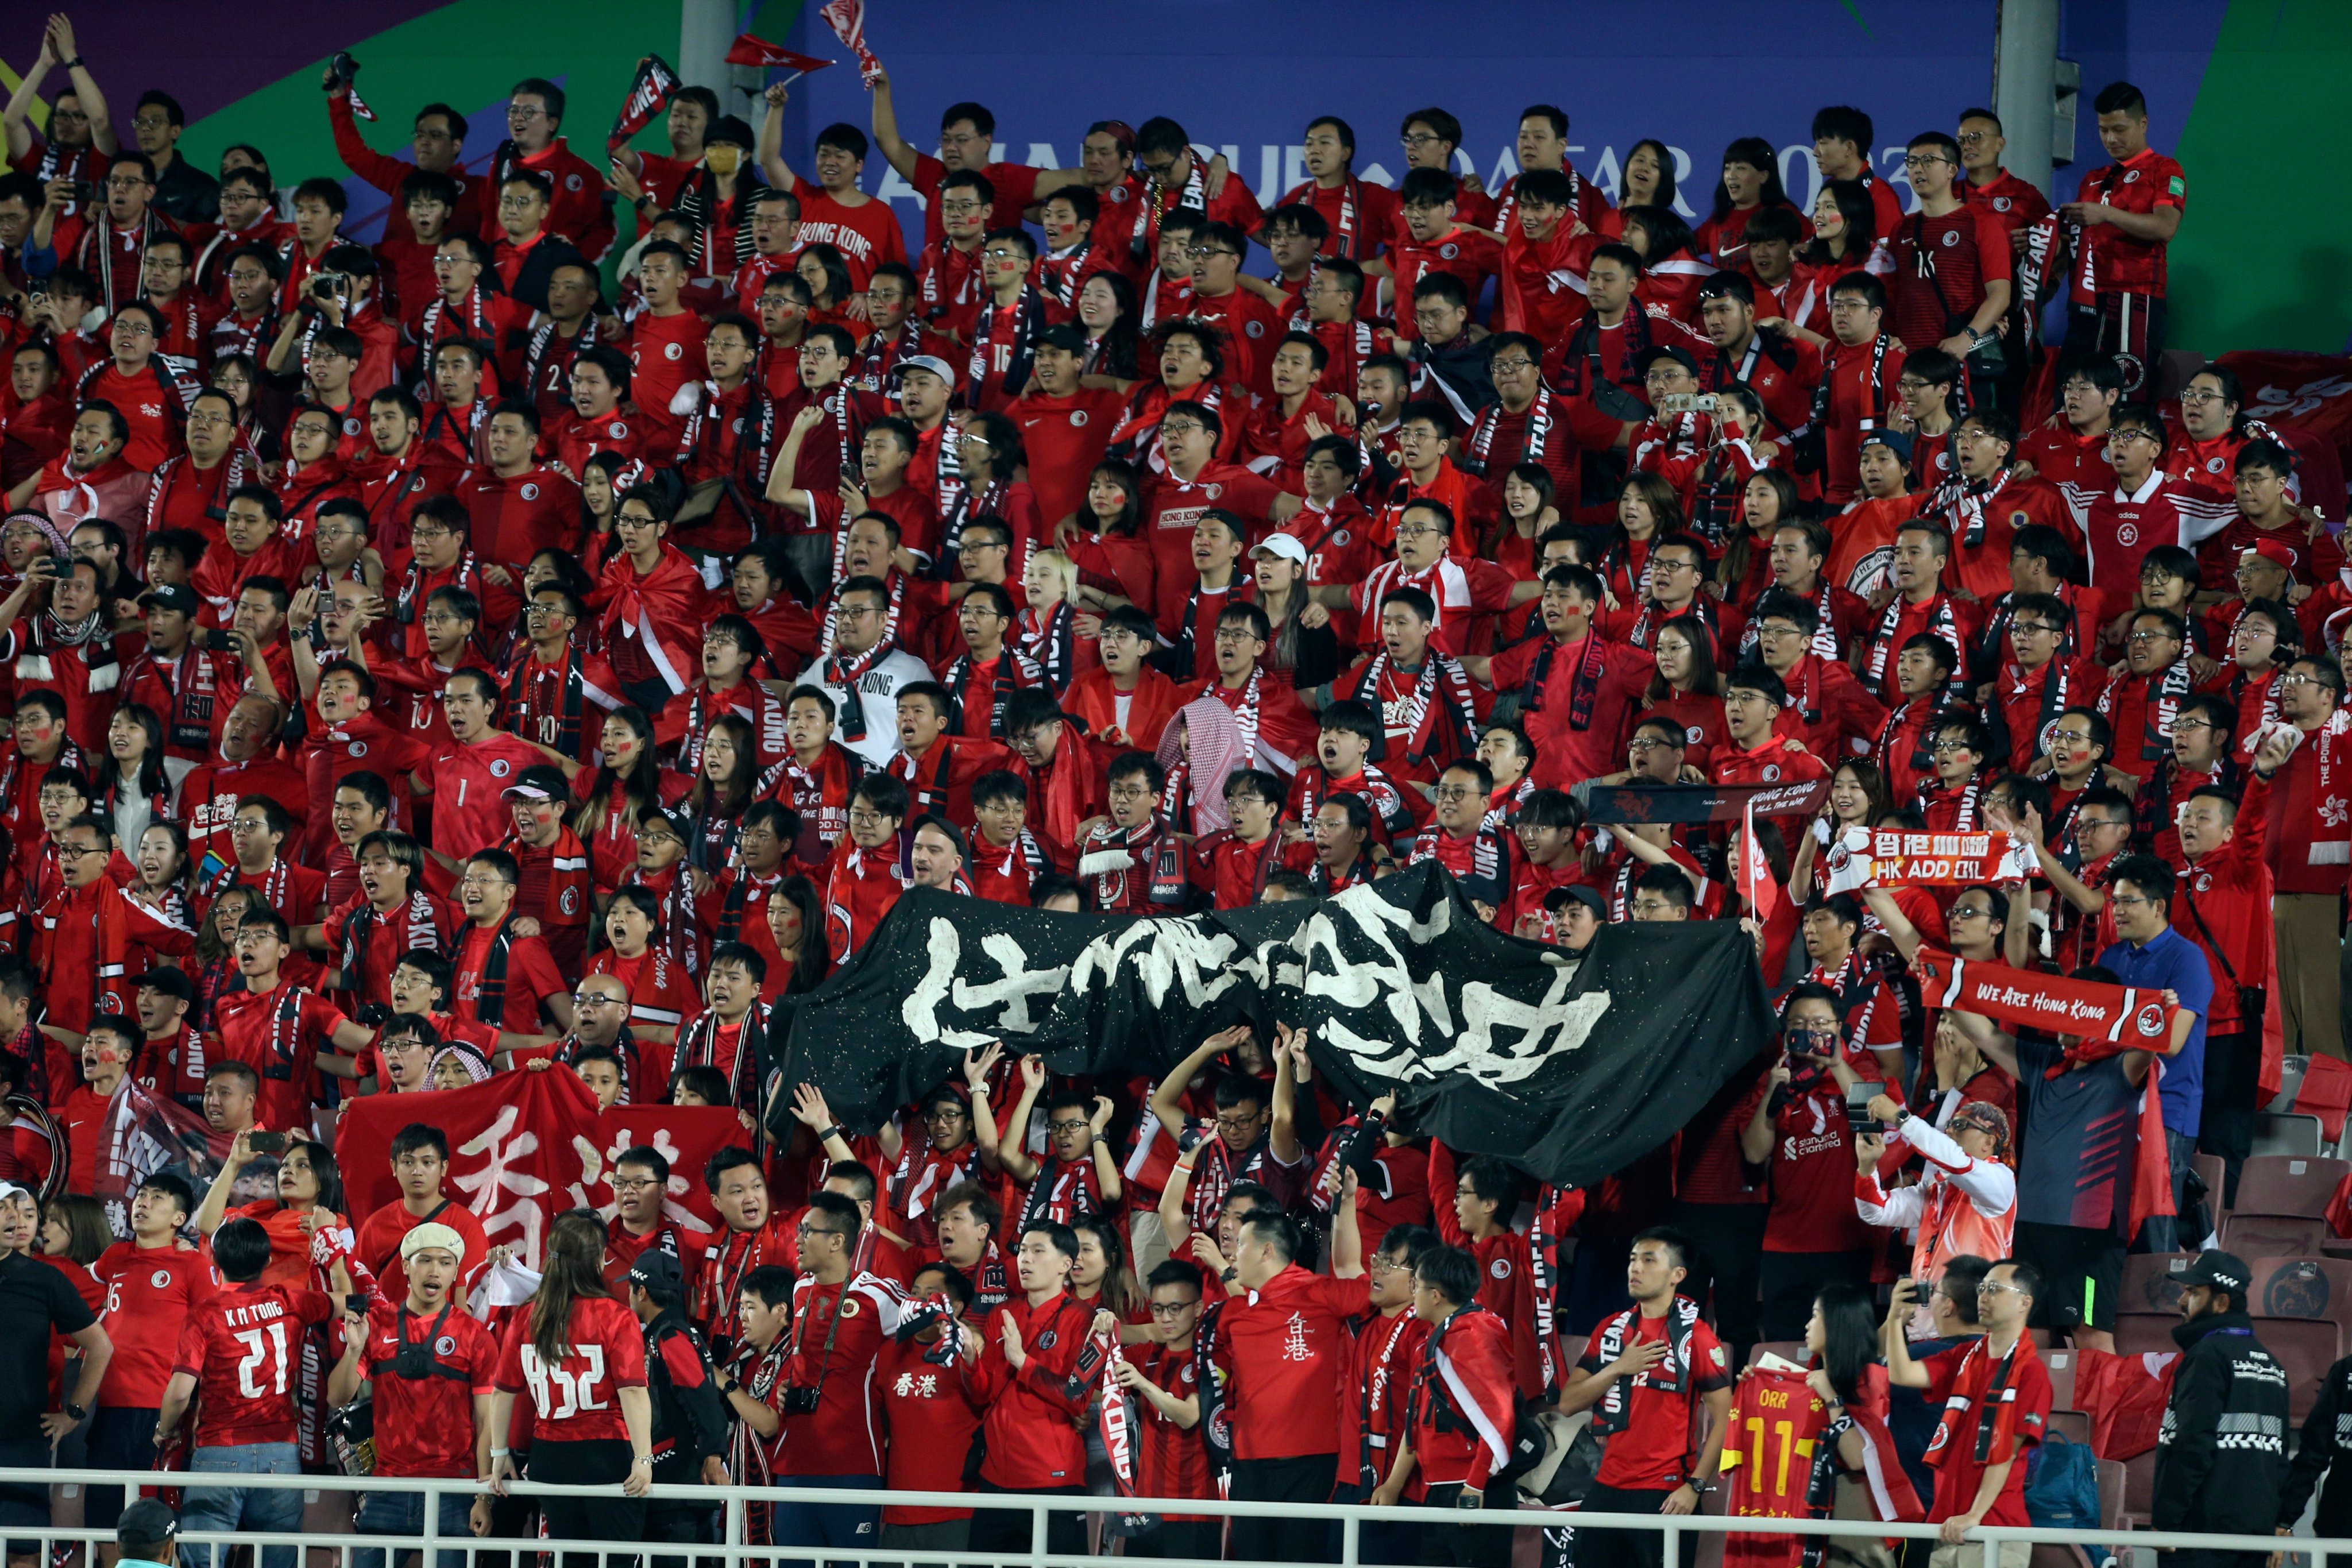 Hong Kong fans show their support at the end of the loss to Palestine in Doha. Photo: AP